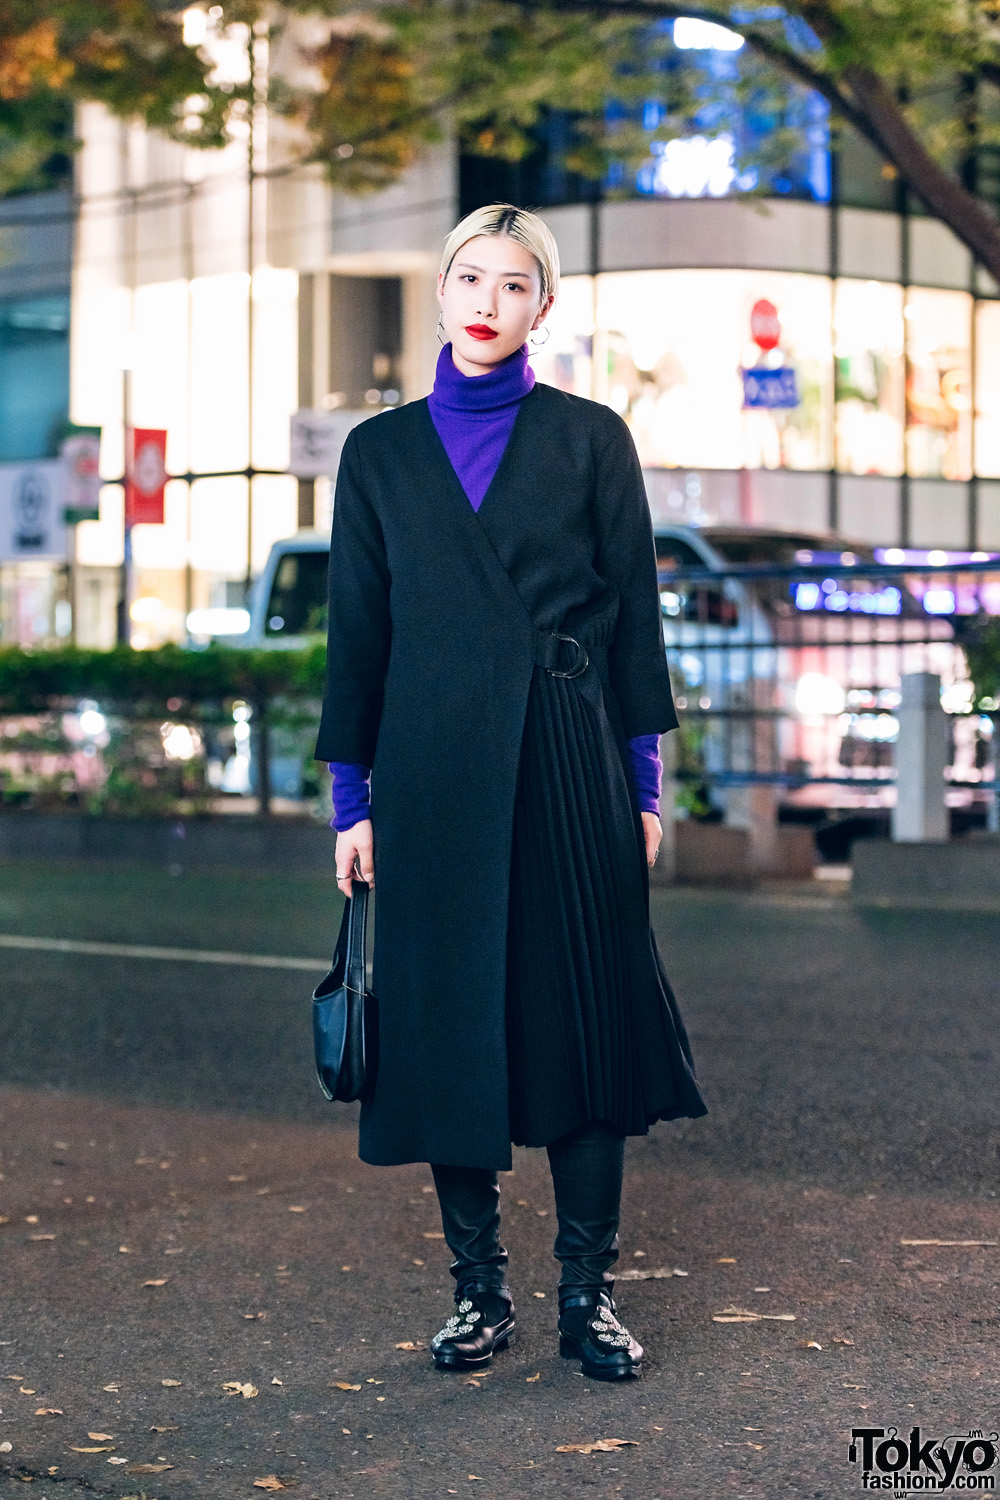 Long Pleated Coat in Harajuku w/ COS Fashion, Tokyo, Bopper Shoes & Vintage Coach